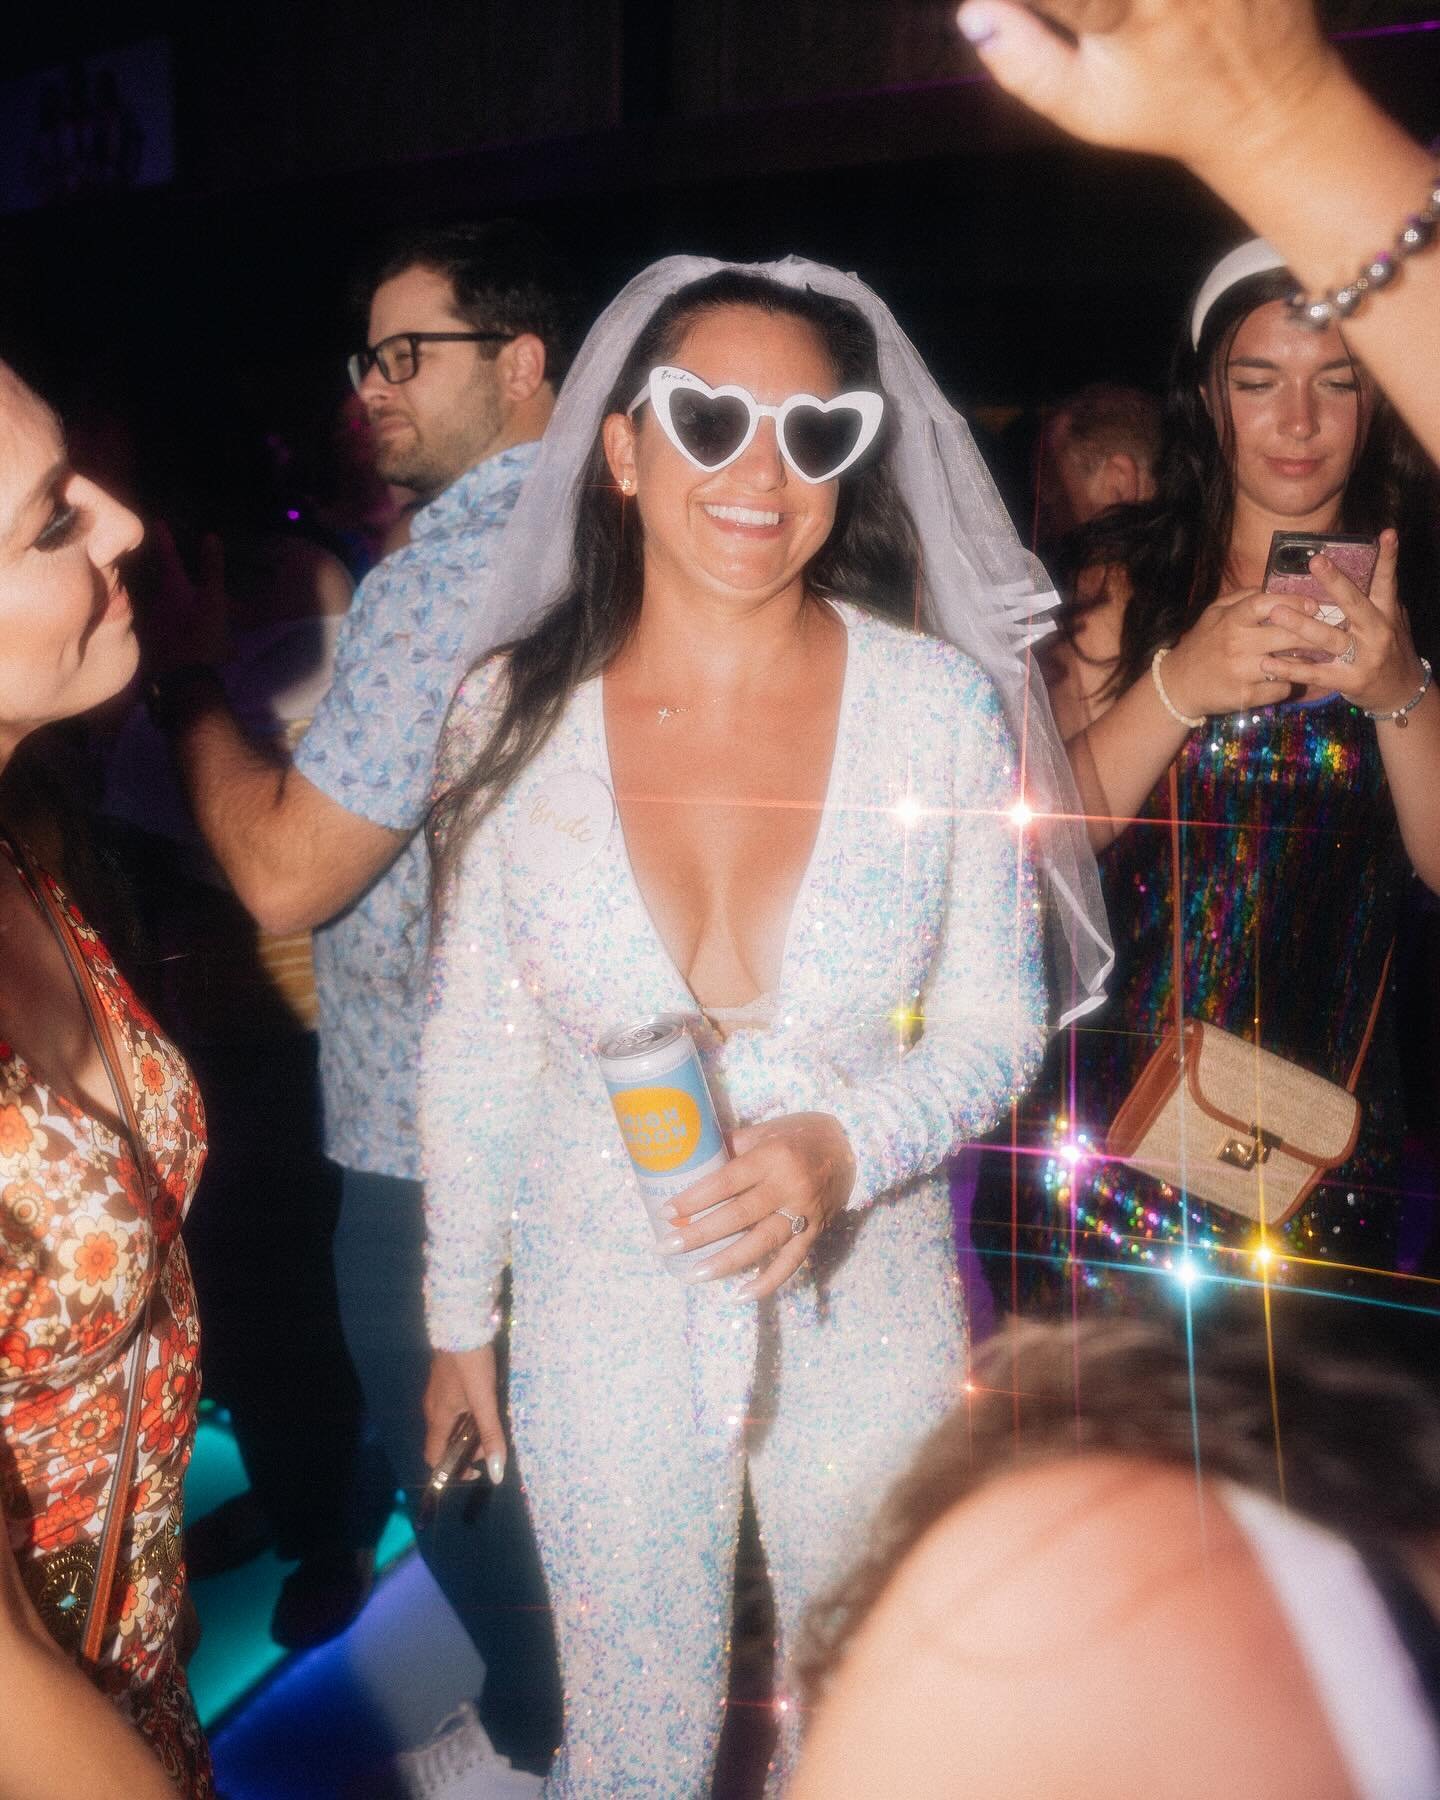 looking for a place to celebrate your last disco?💍🪩

email: chicago@goodnightjb.com to plan your next bachelorette party!!!

this week's hours:
W: 5pm-late
TH: 5pm-late
F: 5pm-2am
SAT: 2pm-3am
SUN: 2pm-late